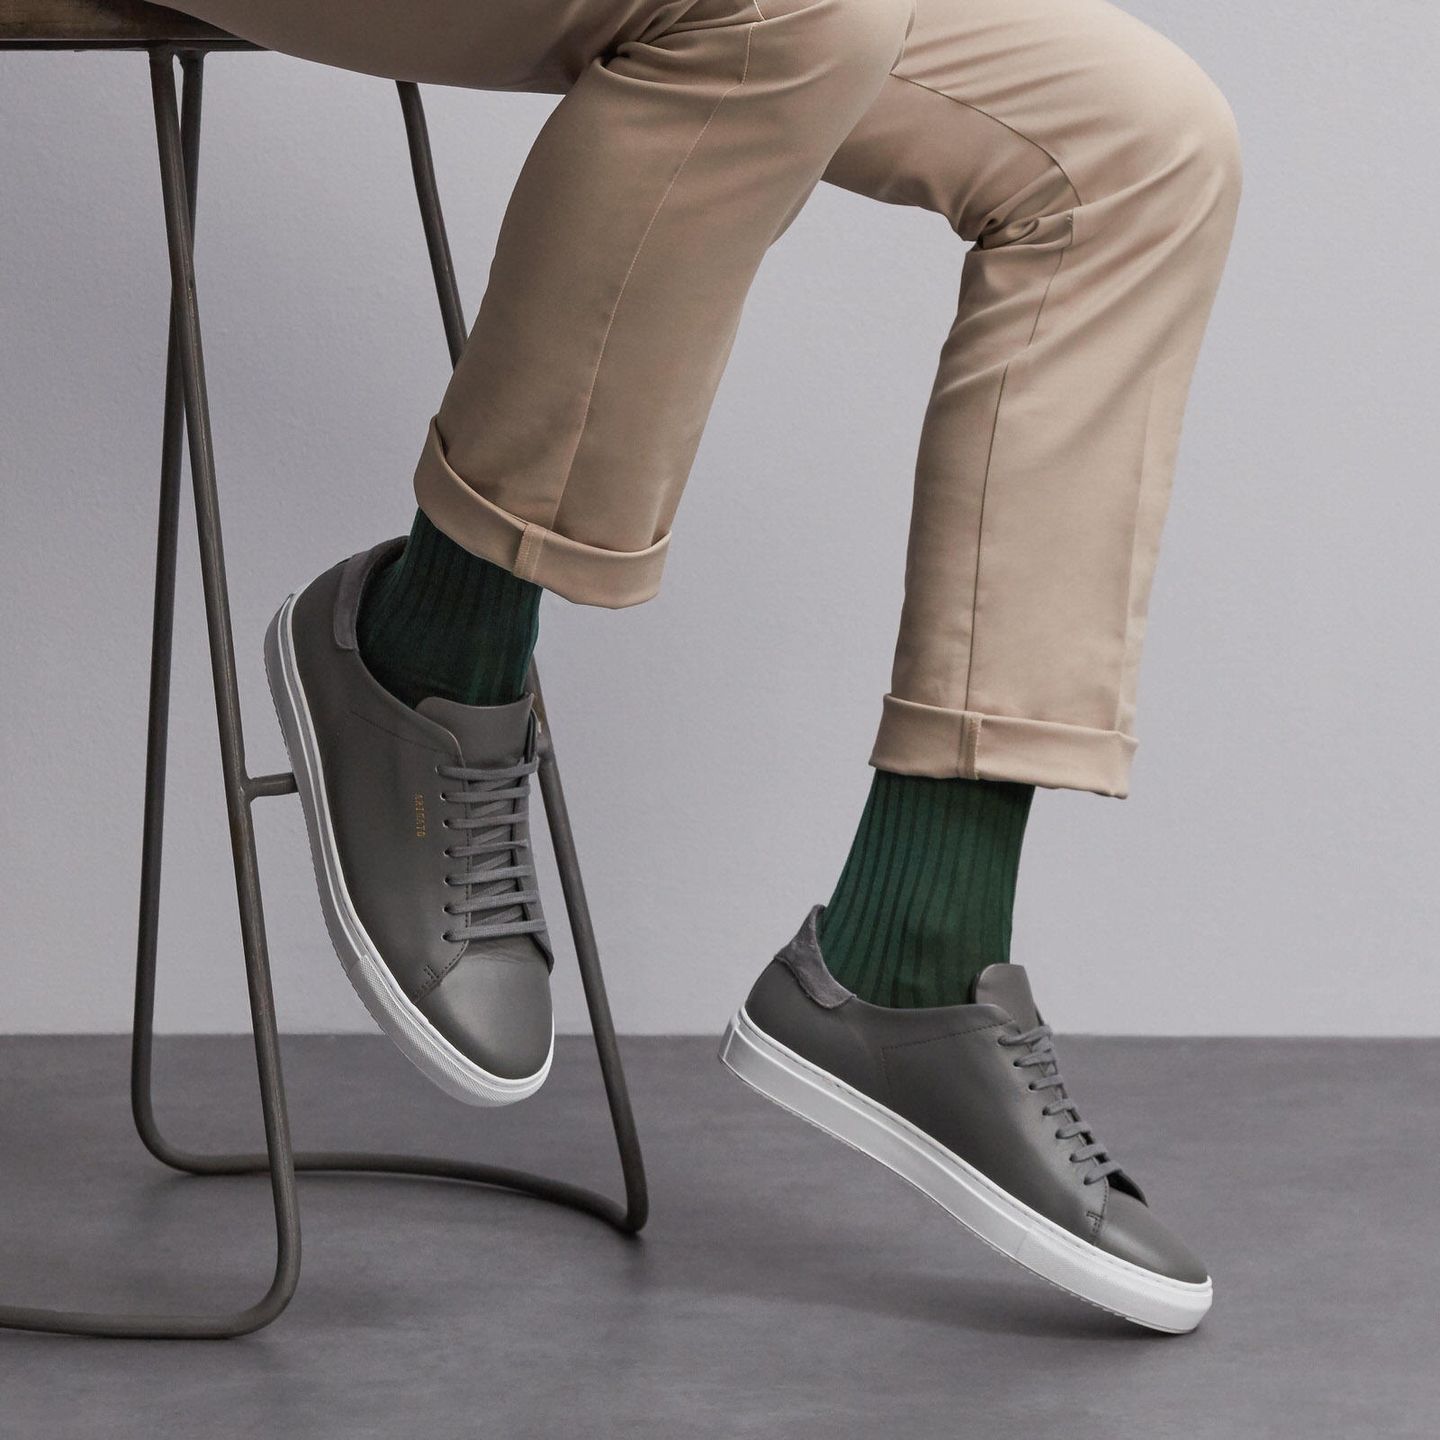 Person wearing green socks with grey shoes